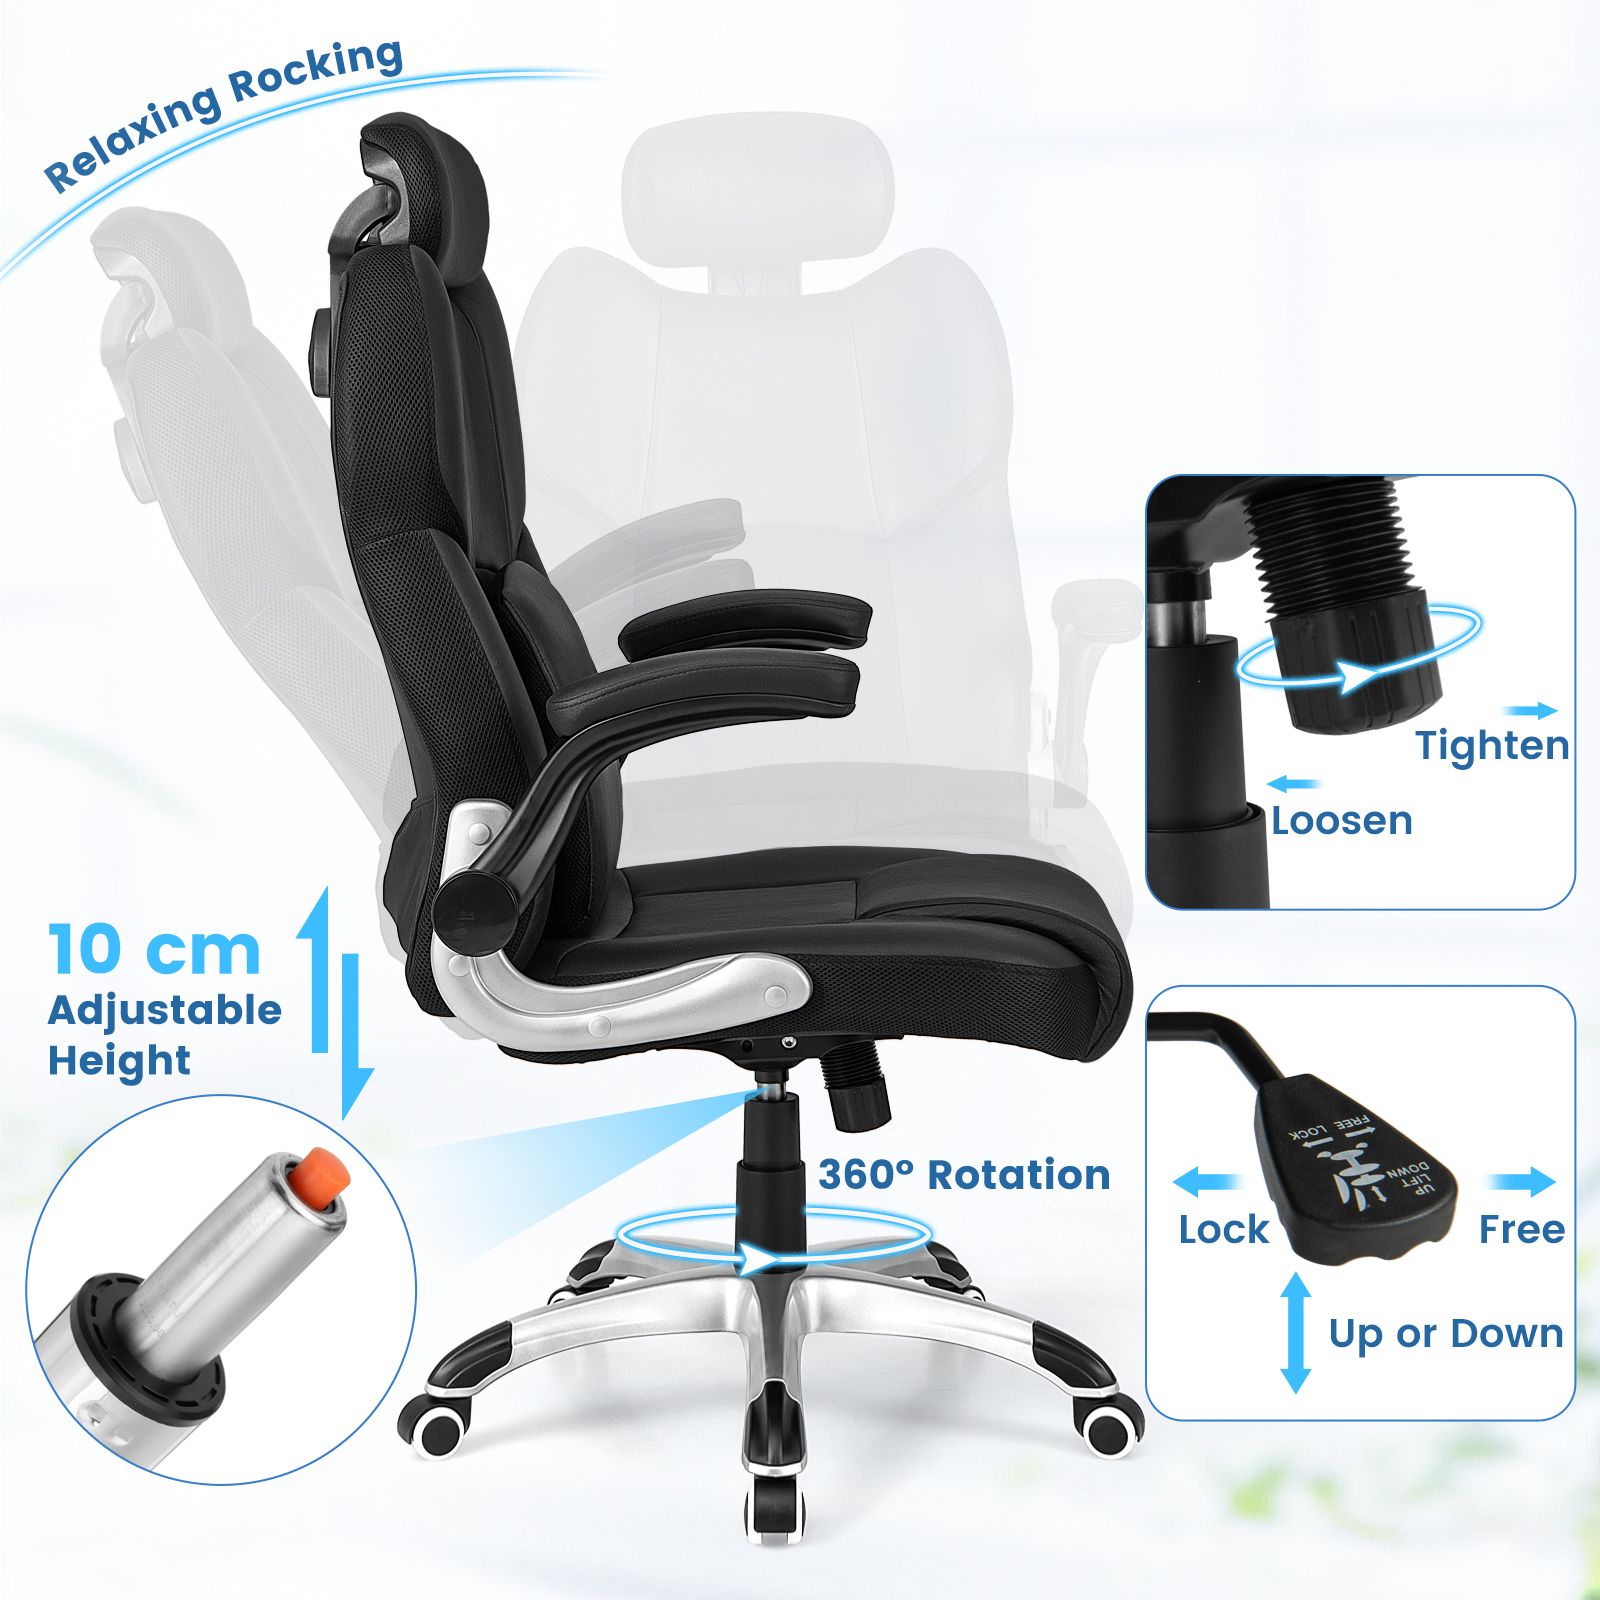 Kneading Massage Office Chair with Adjustable Height and Rocking Function